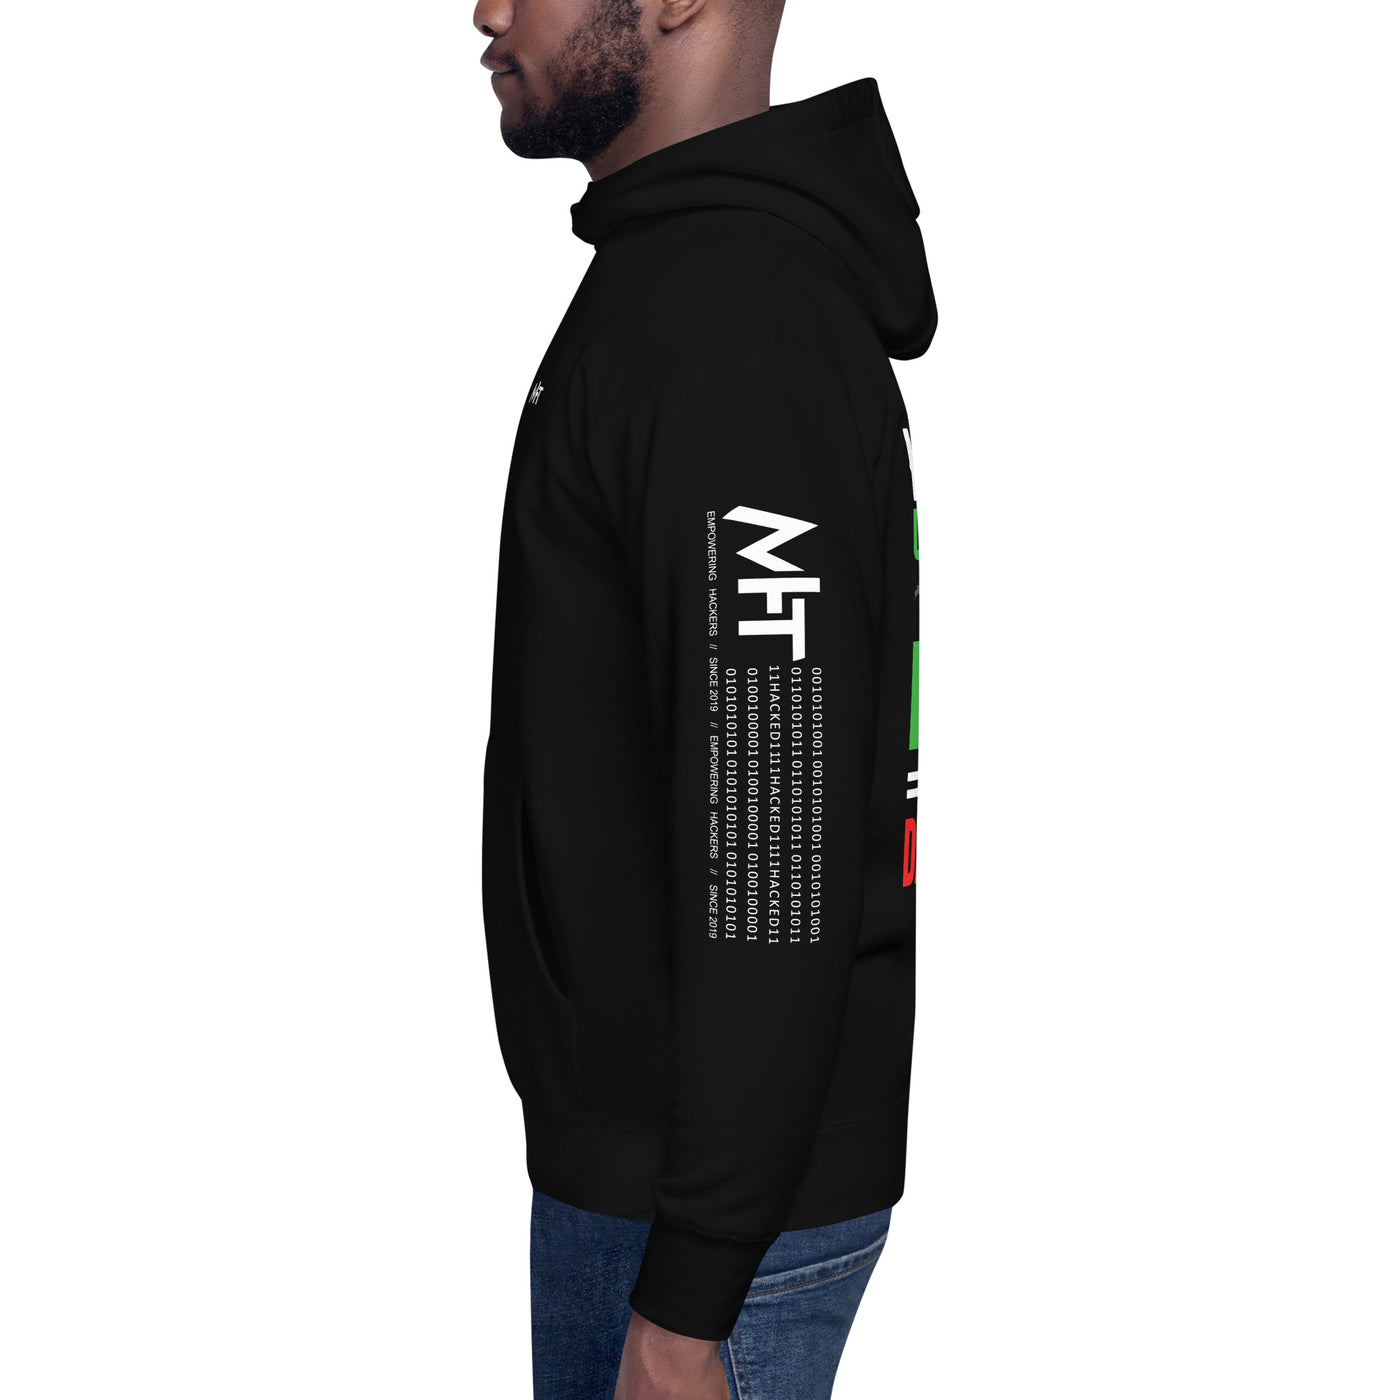 Life has its ups and downs; I call it Day Trading - Unisex Hoodie